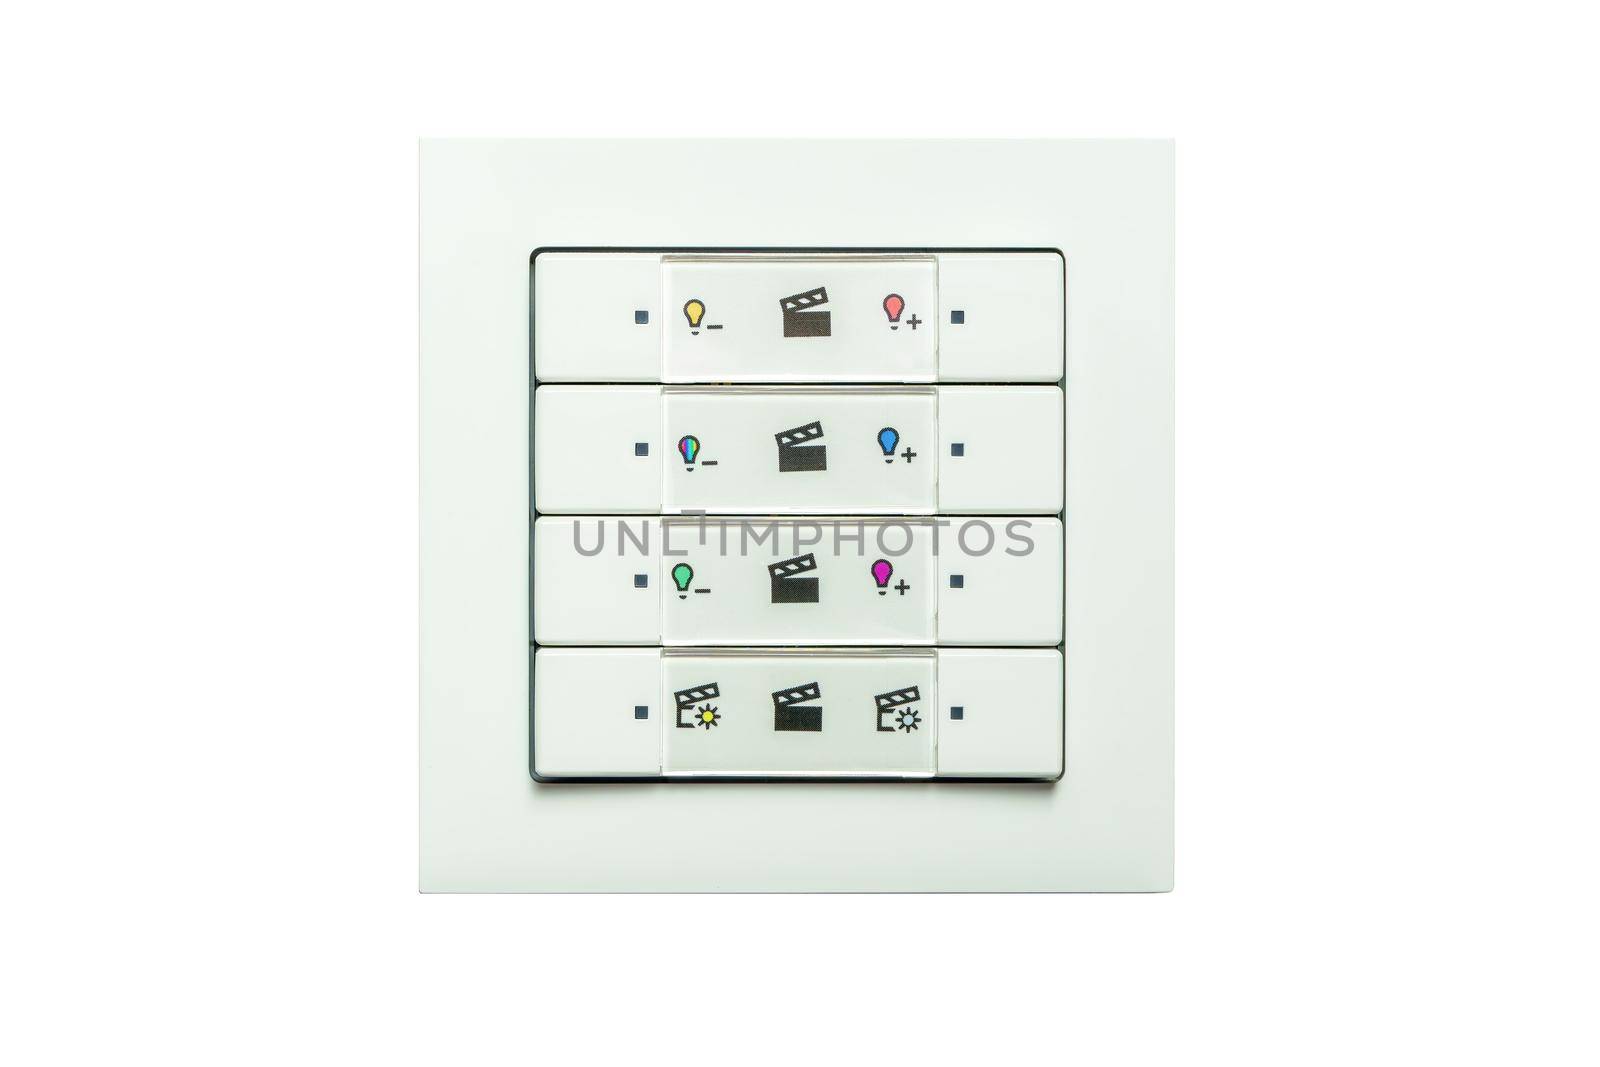 A white radio wall switch with different light scenarios, close-up by silent303